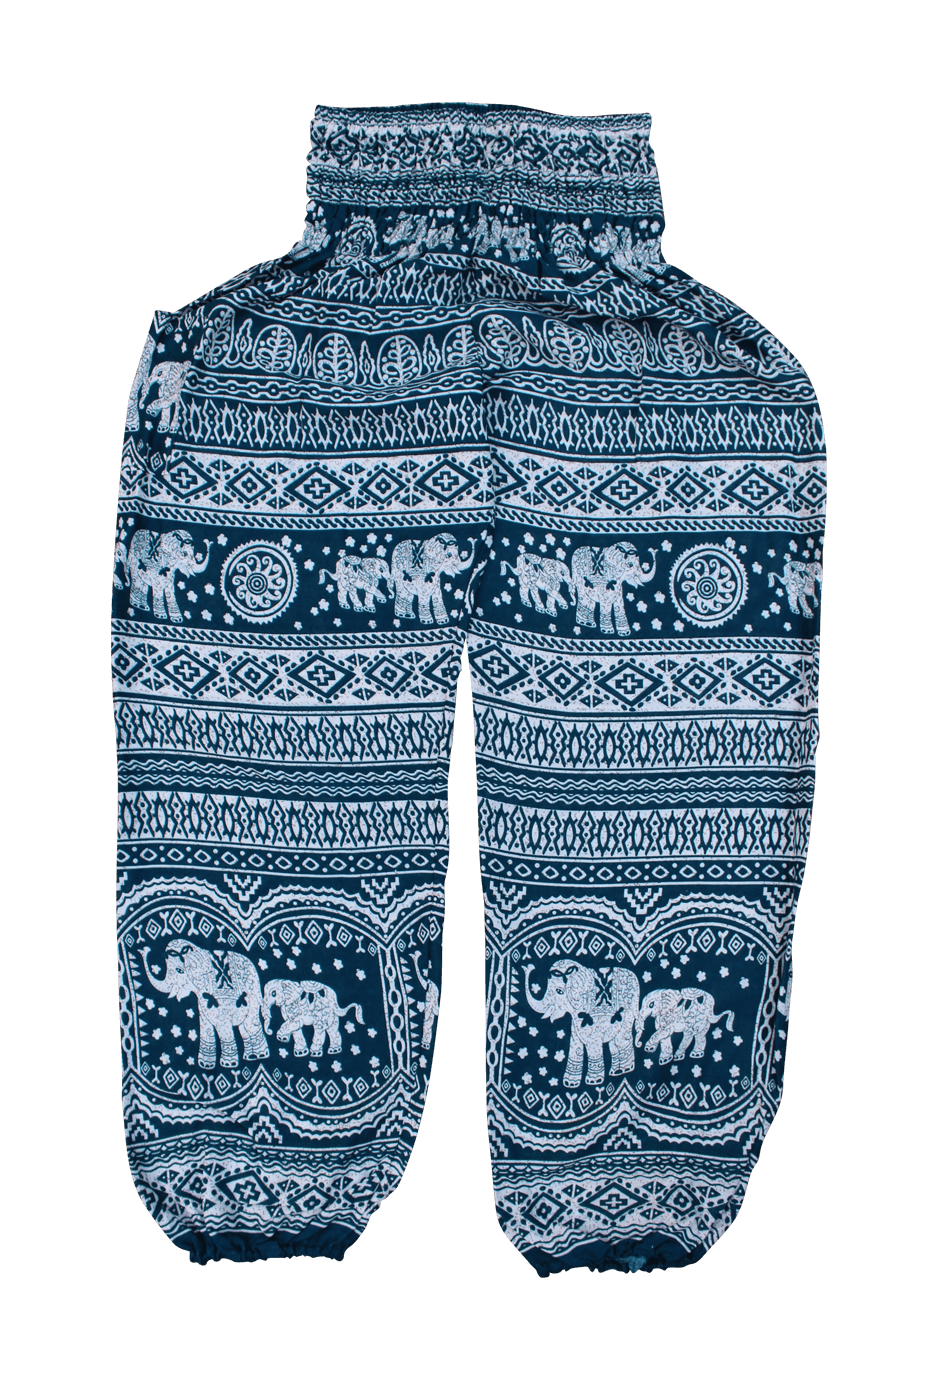 Thai TikTokers are making 'elephant pants'… cool? | The Straits Times